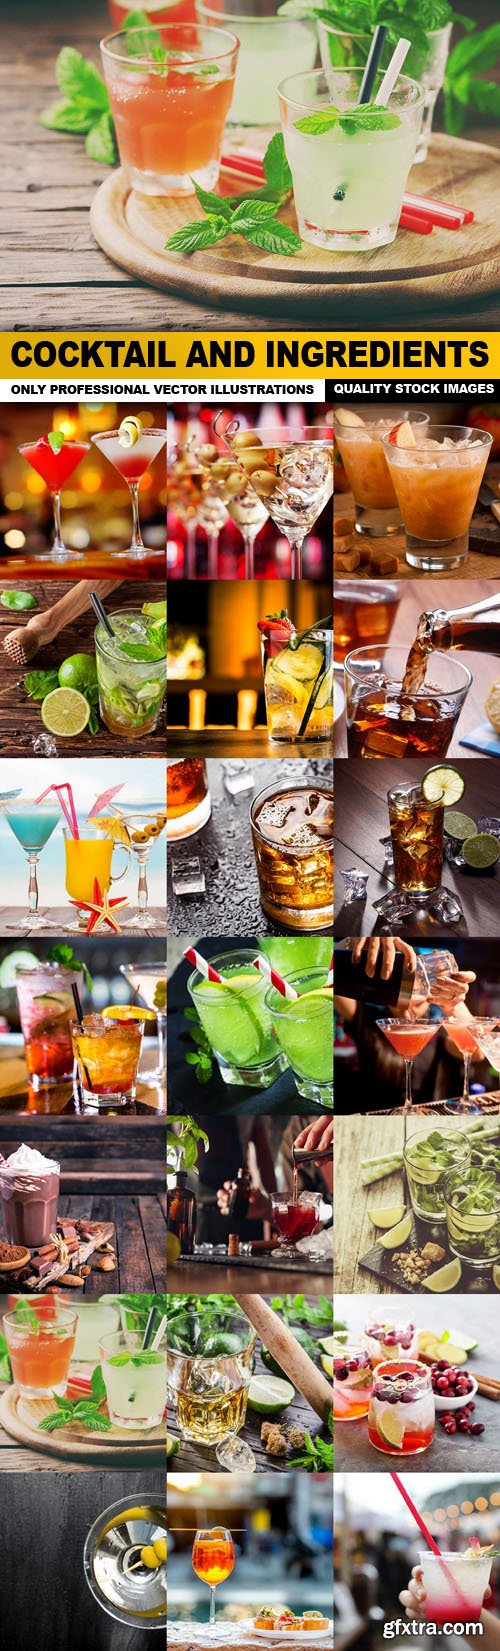 Cocktail And Ingredients - 25 HQ Images